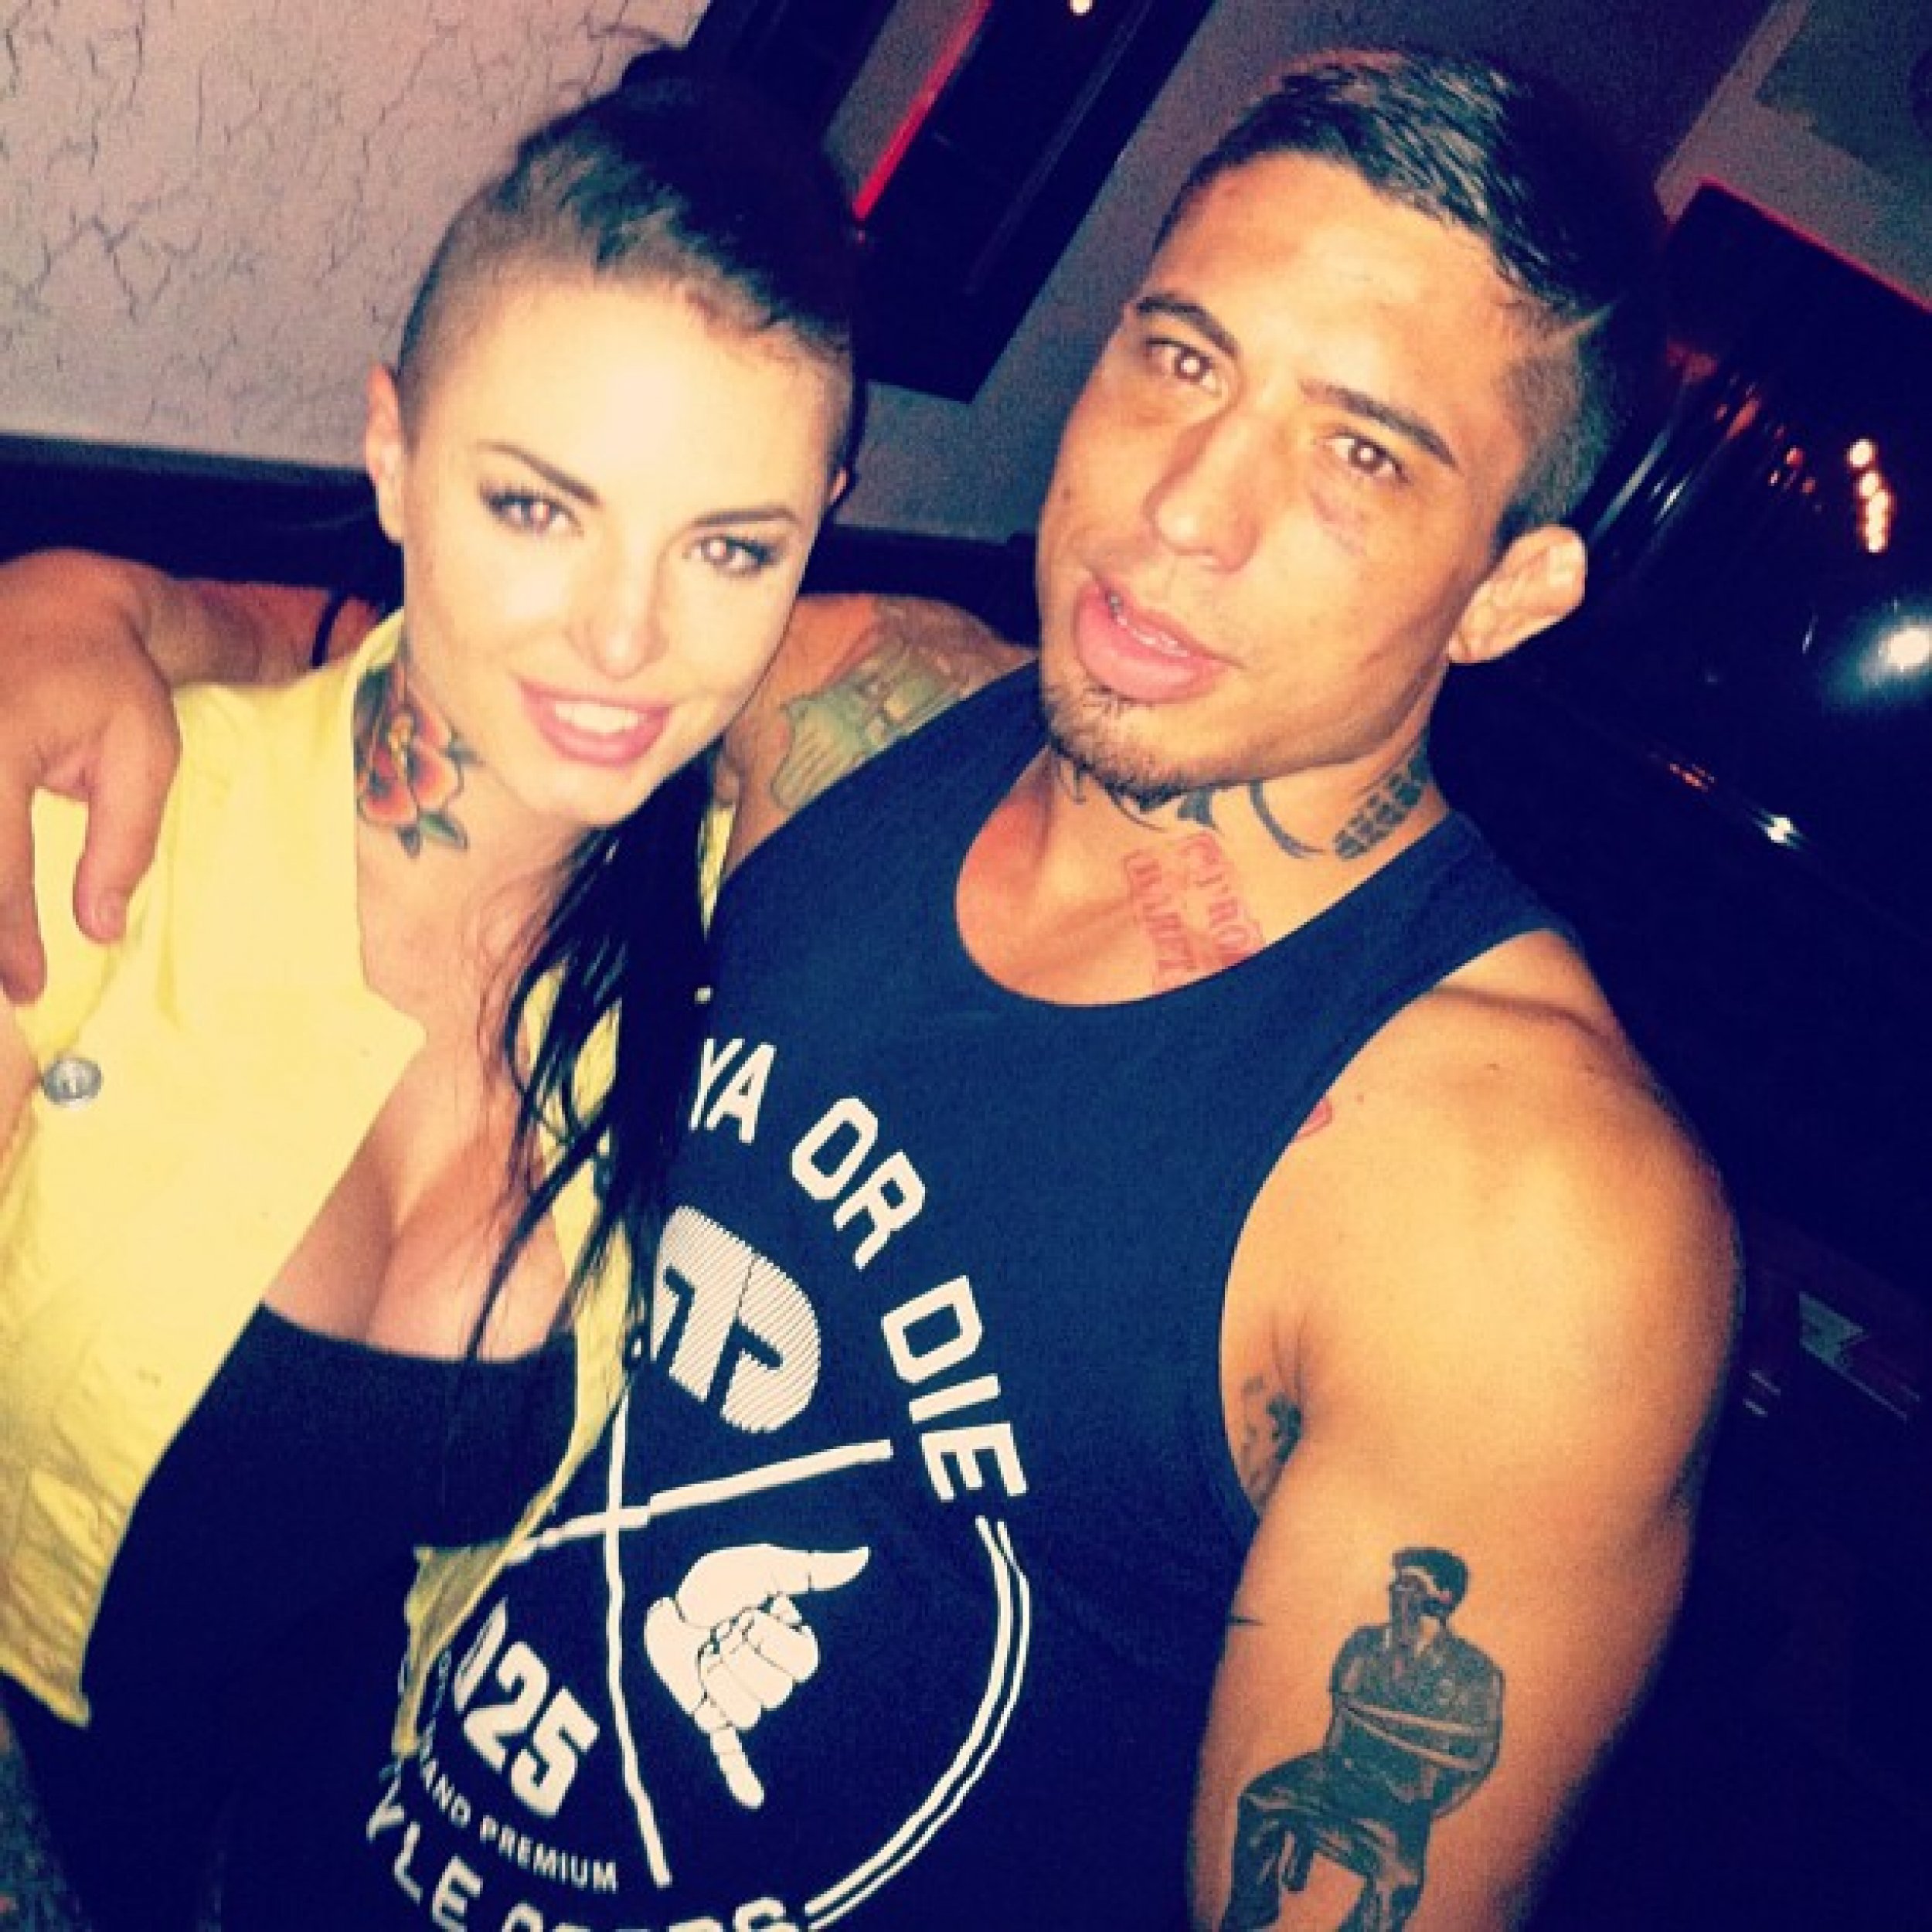 dennise williams recommends christy mack twitter pic